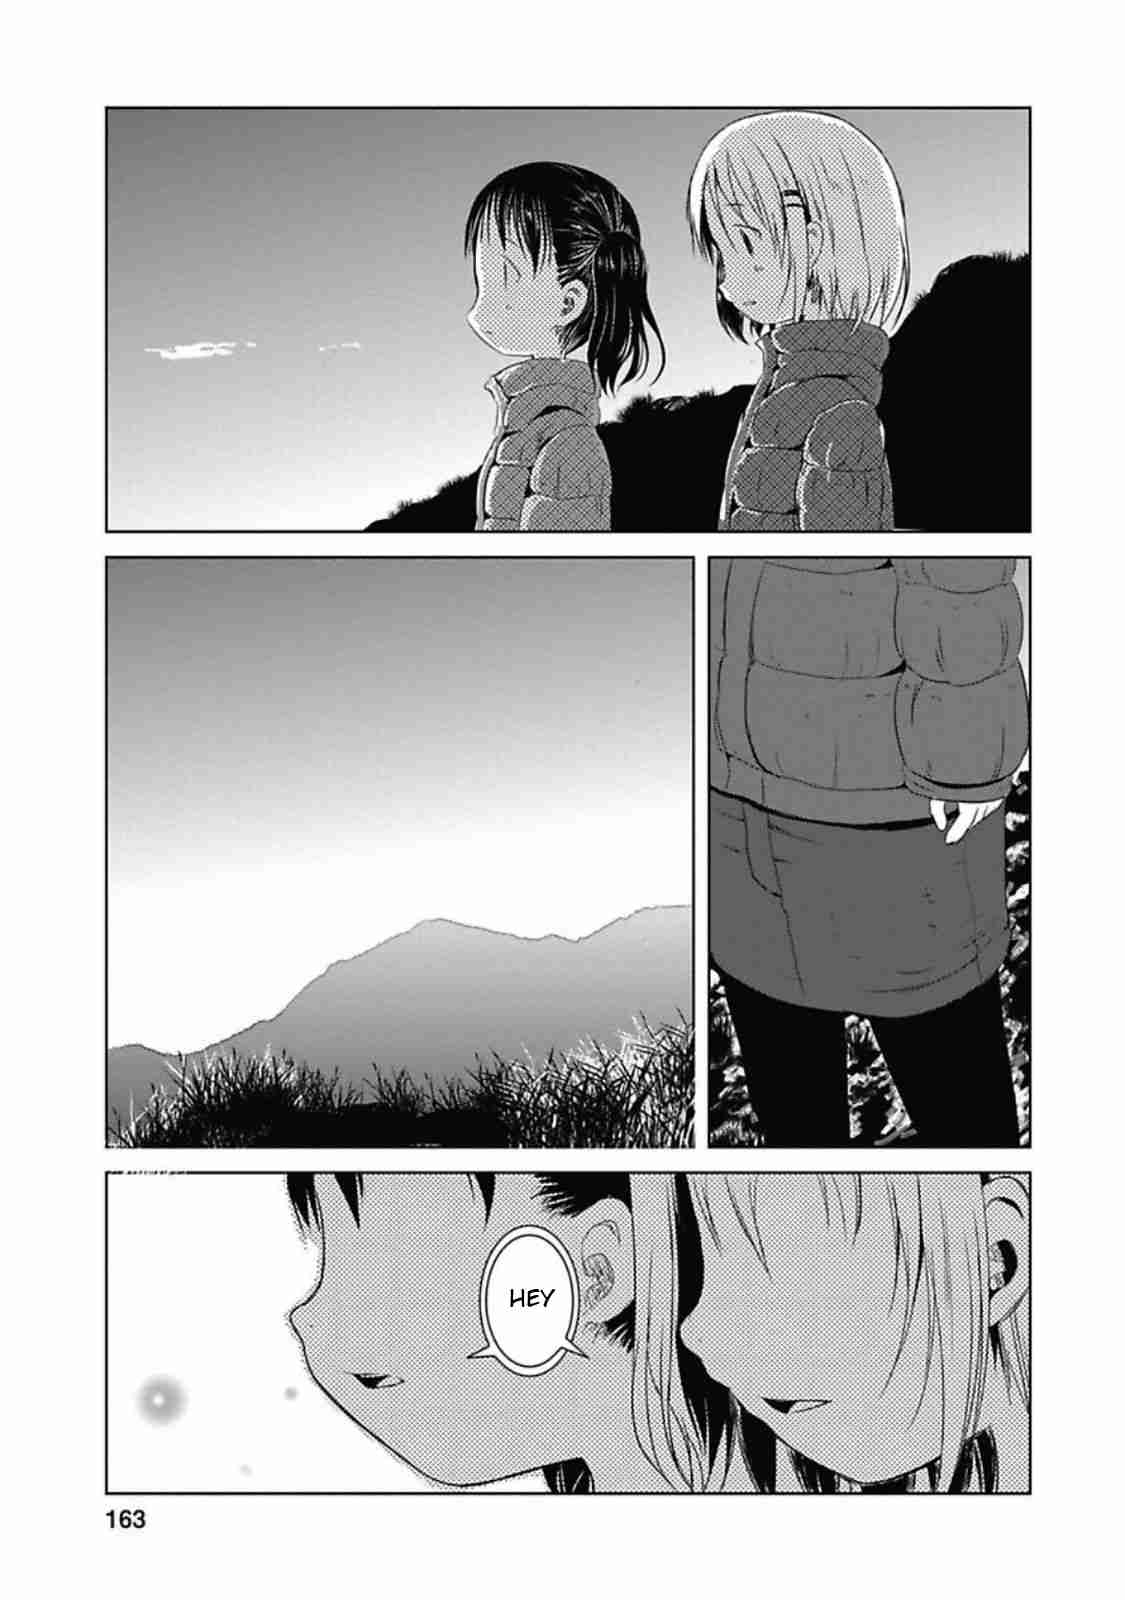 Yama No Susume Vol. 4 Ch. 32 The Sunrise of Our Memories